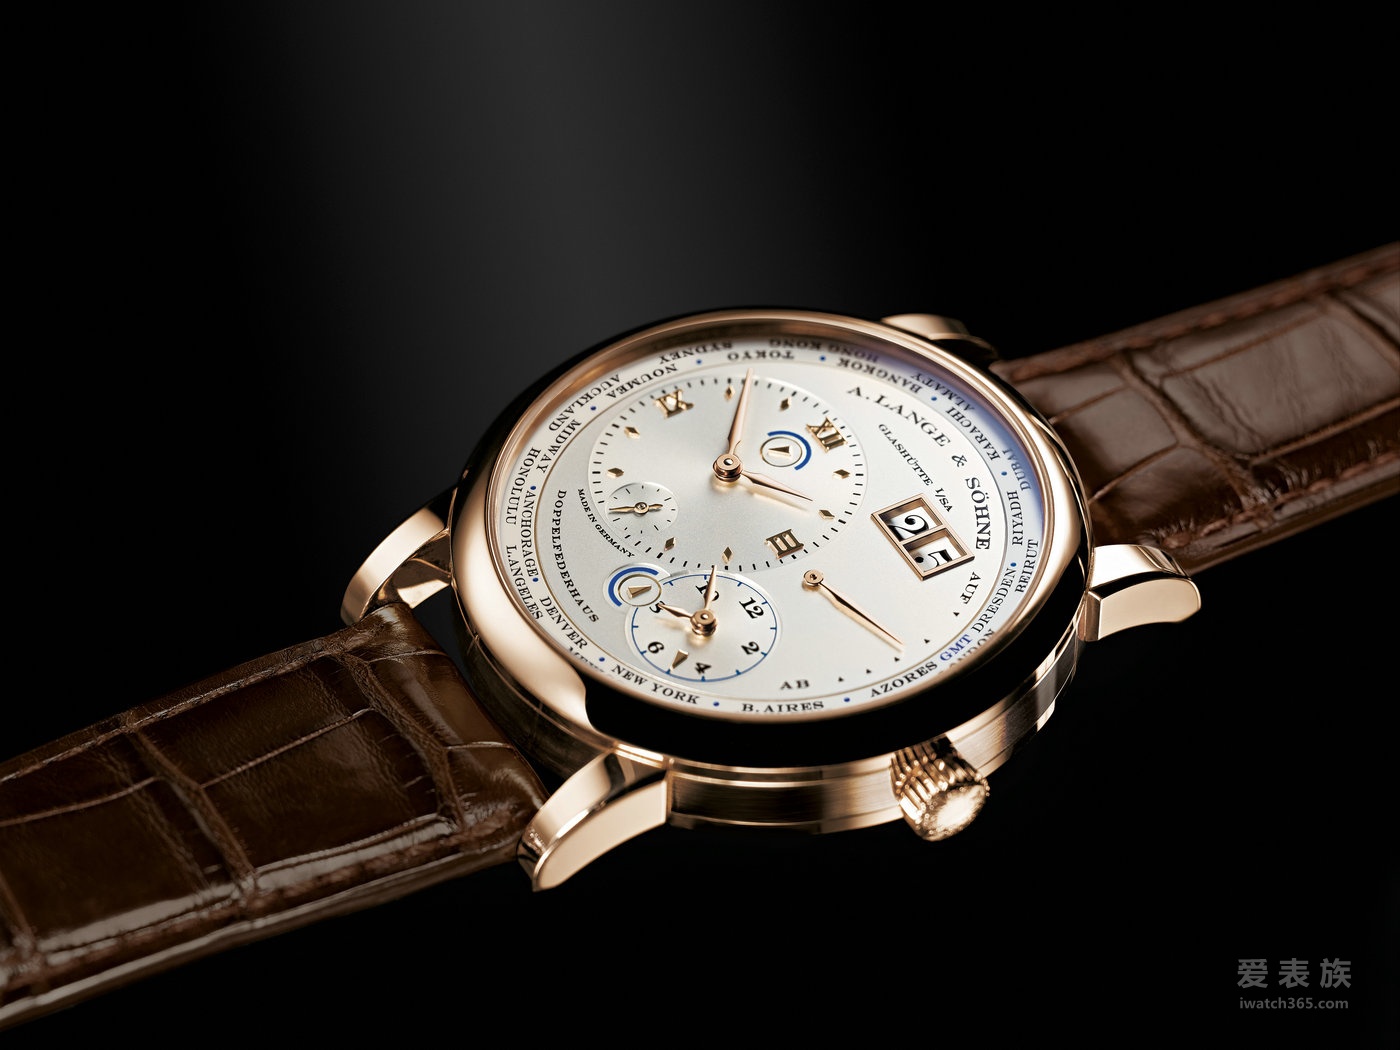 Lange 1 Time Zone special edition commemorated historical moment